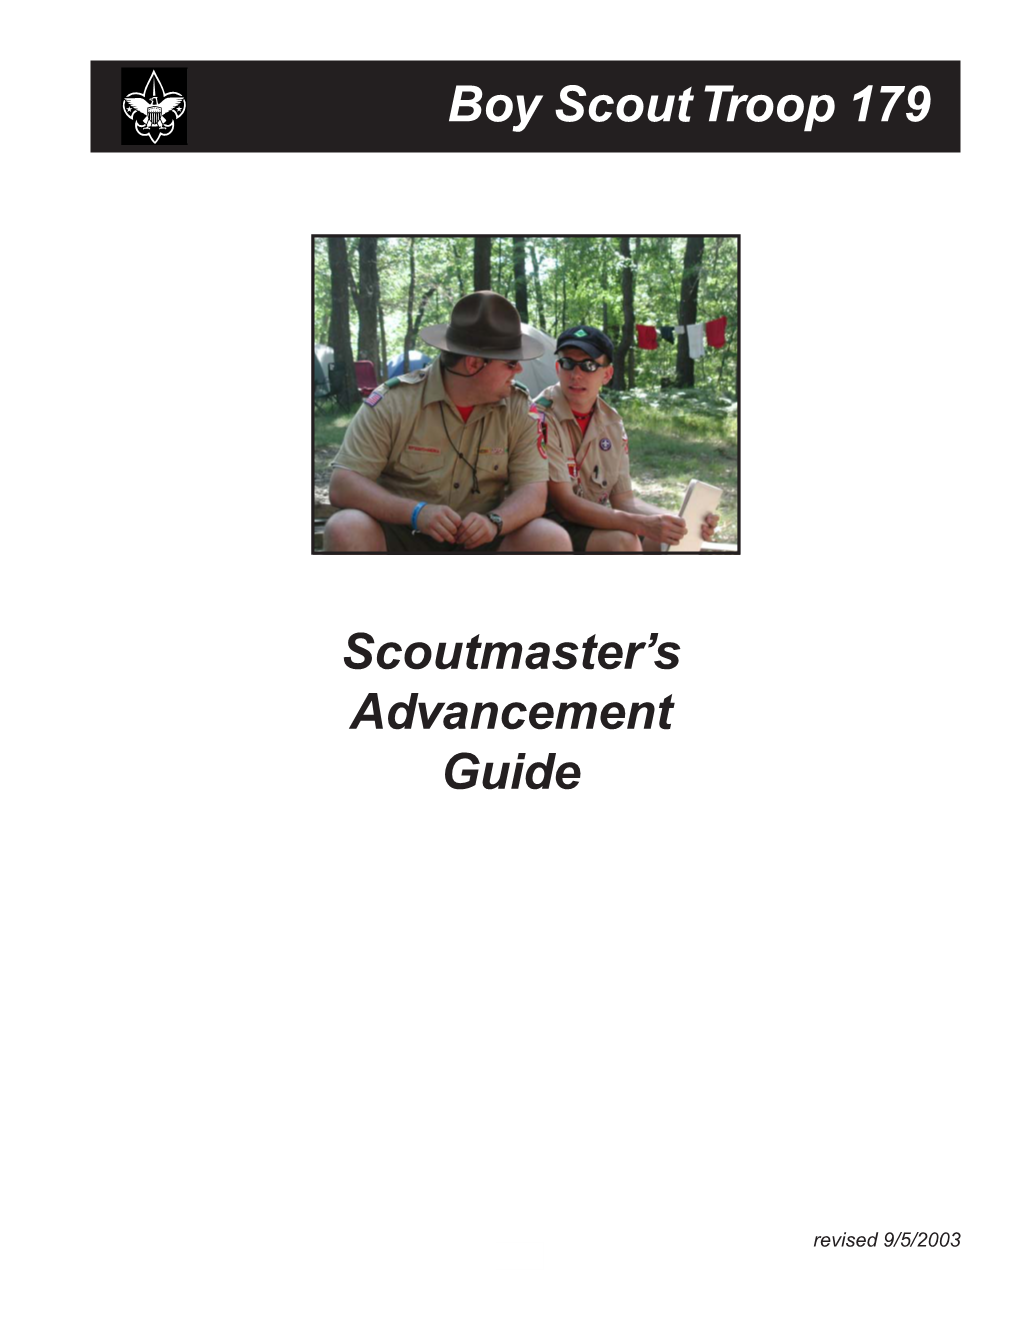 Scoutmaster Guide